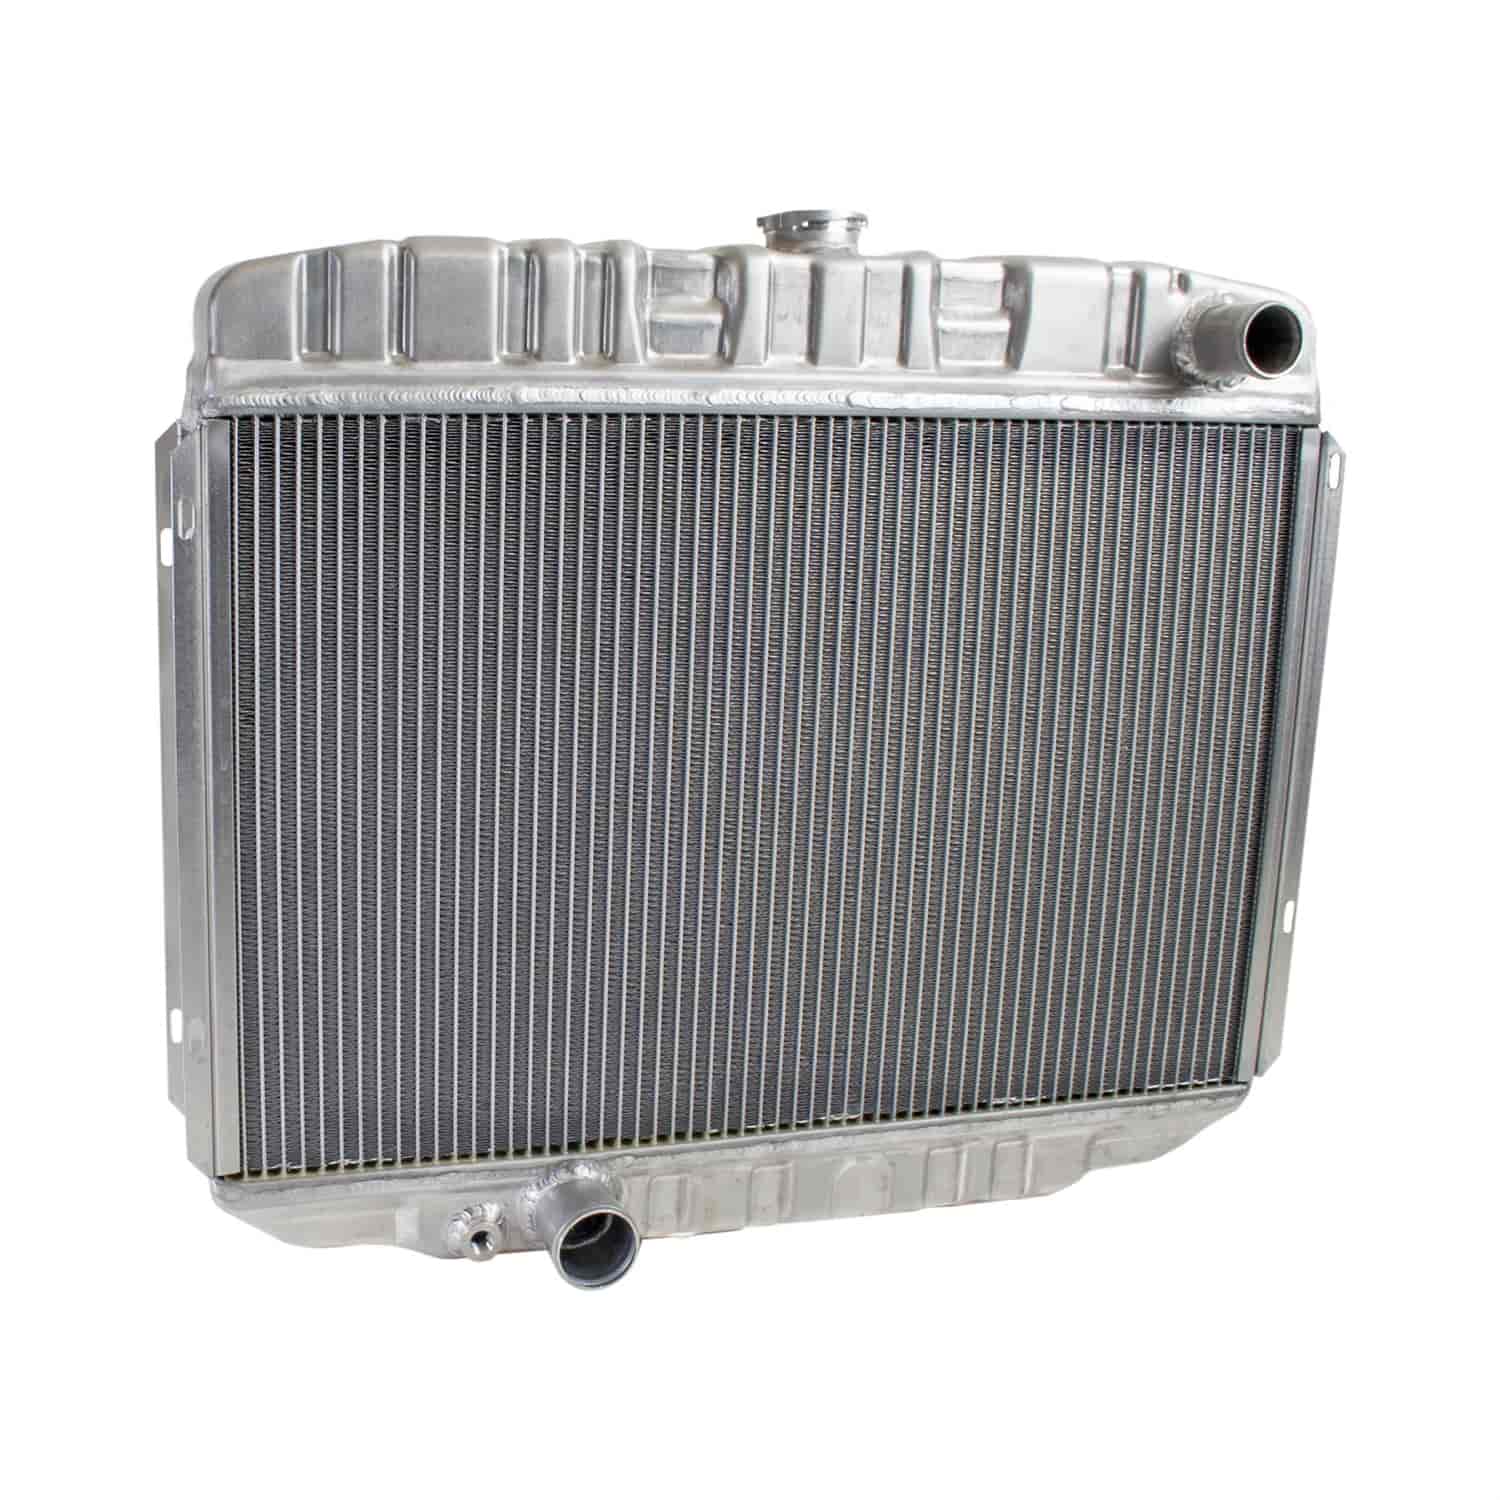 ExactFit Radiator for 1968-1970 Ford Mustang/Mercury Cougar with